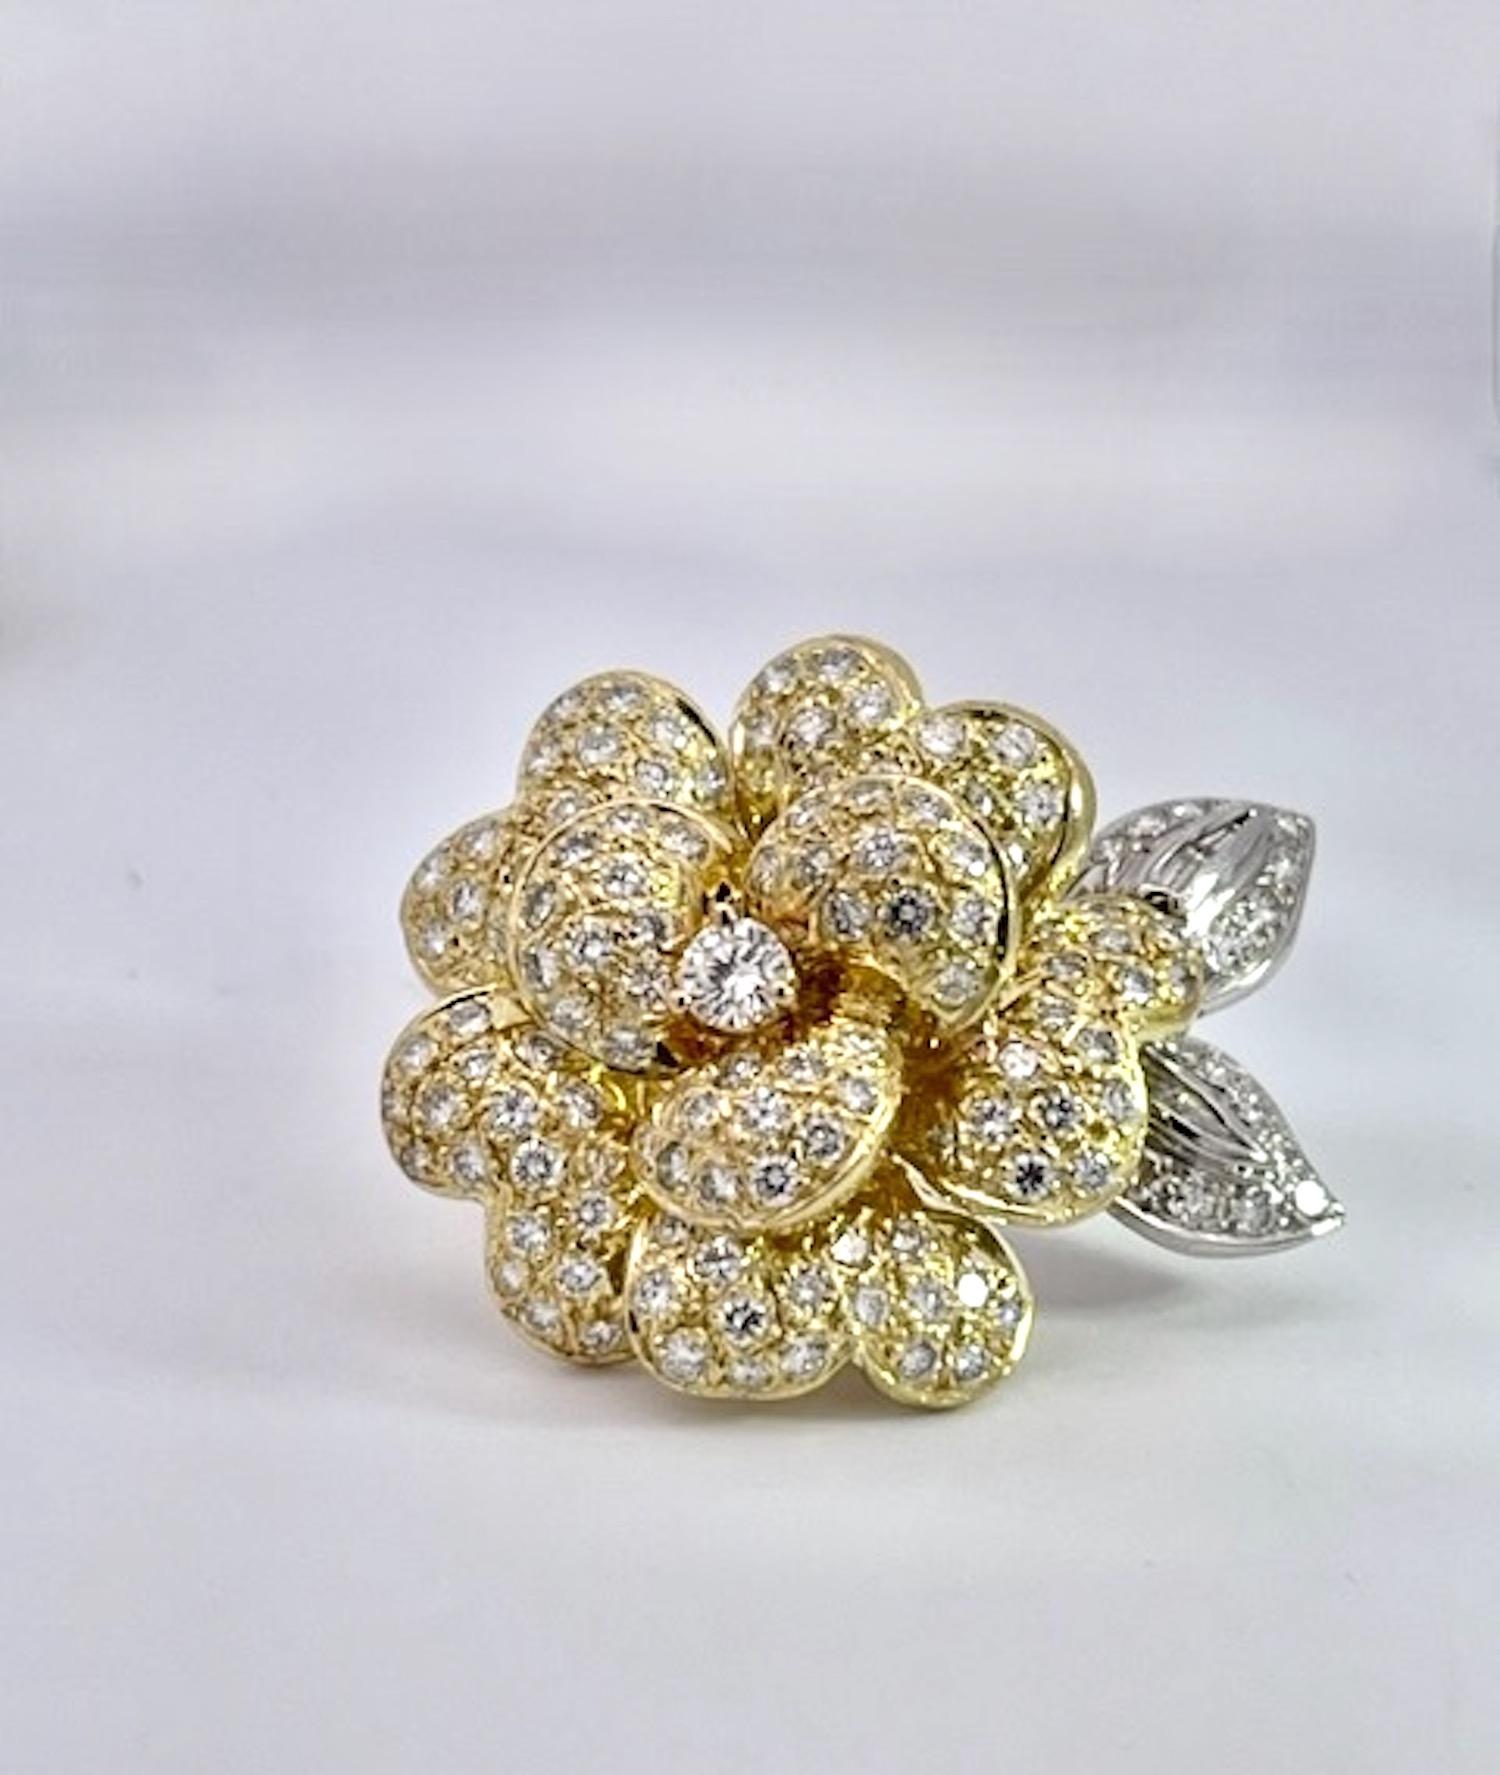 Diamond Rose Earrings Large Yellow Gold 14K For Sale 6